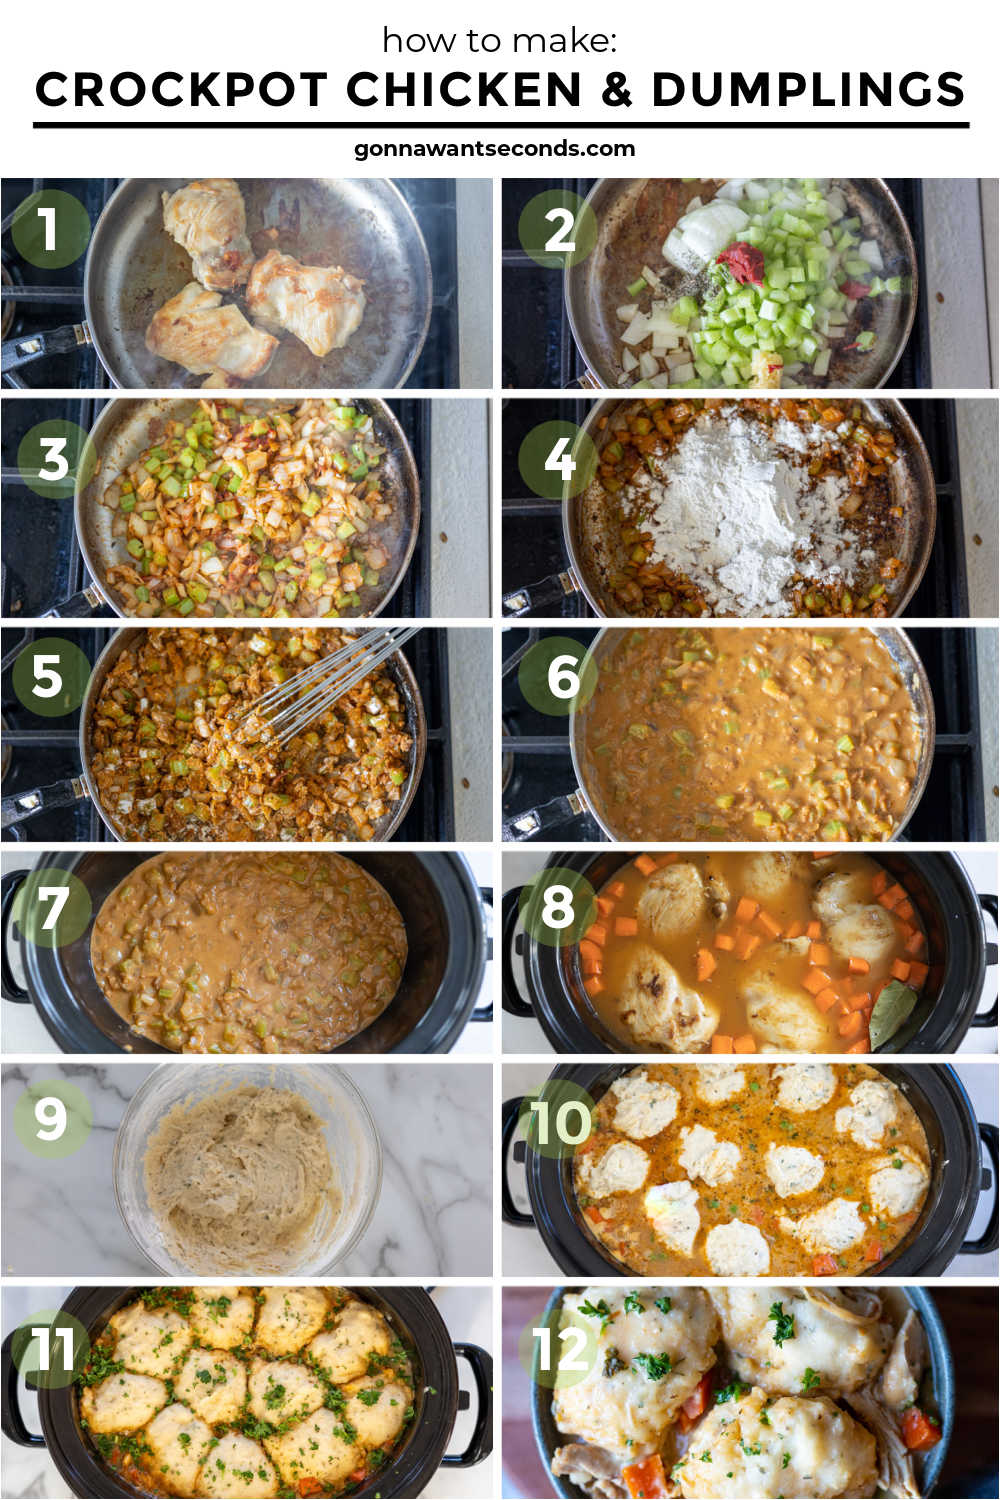 Step by step how to make Crockpot Chicken and Dumplings